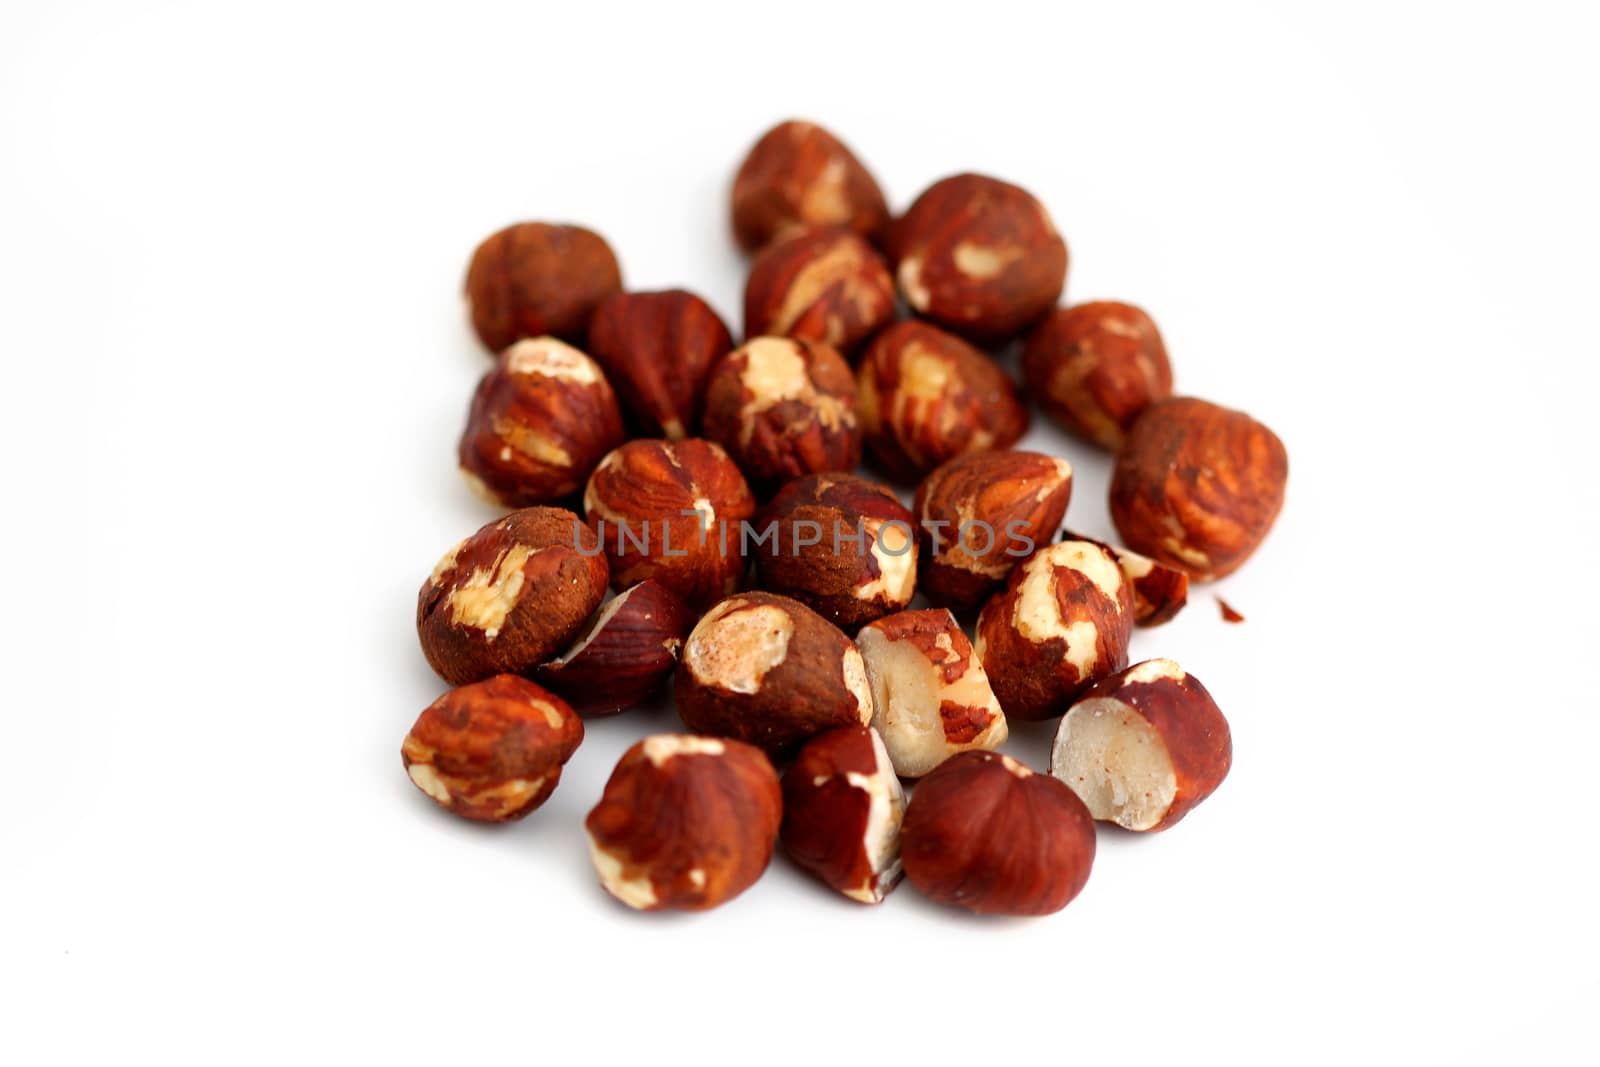 Pile of brown hazelnuts on white background.